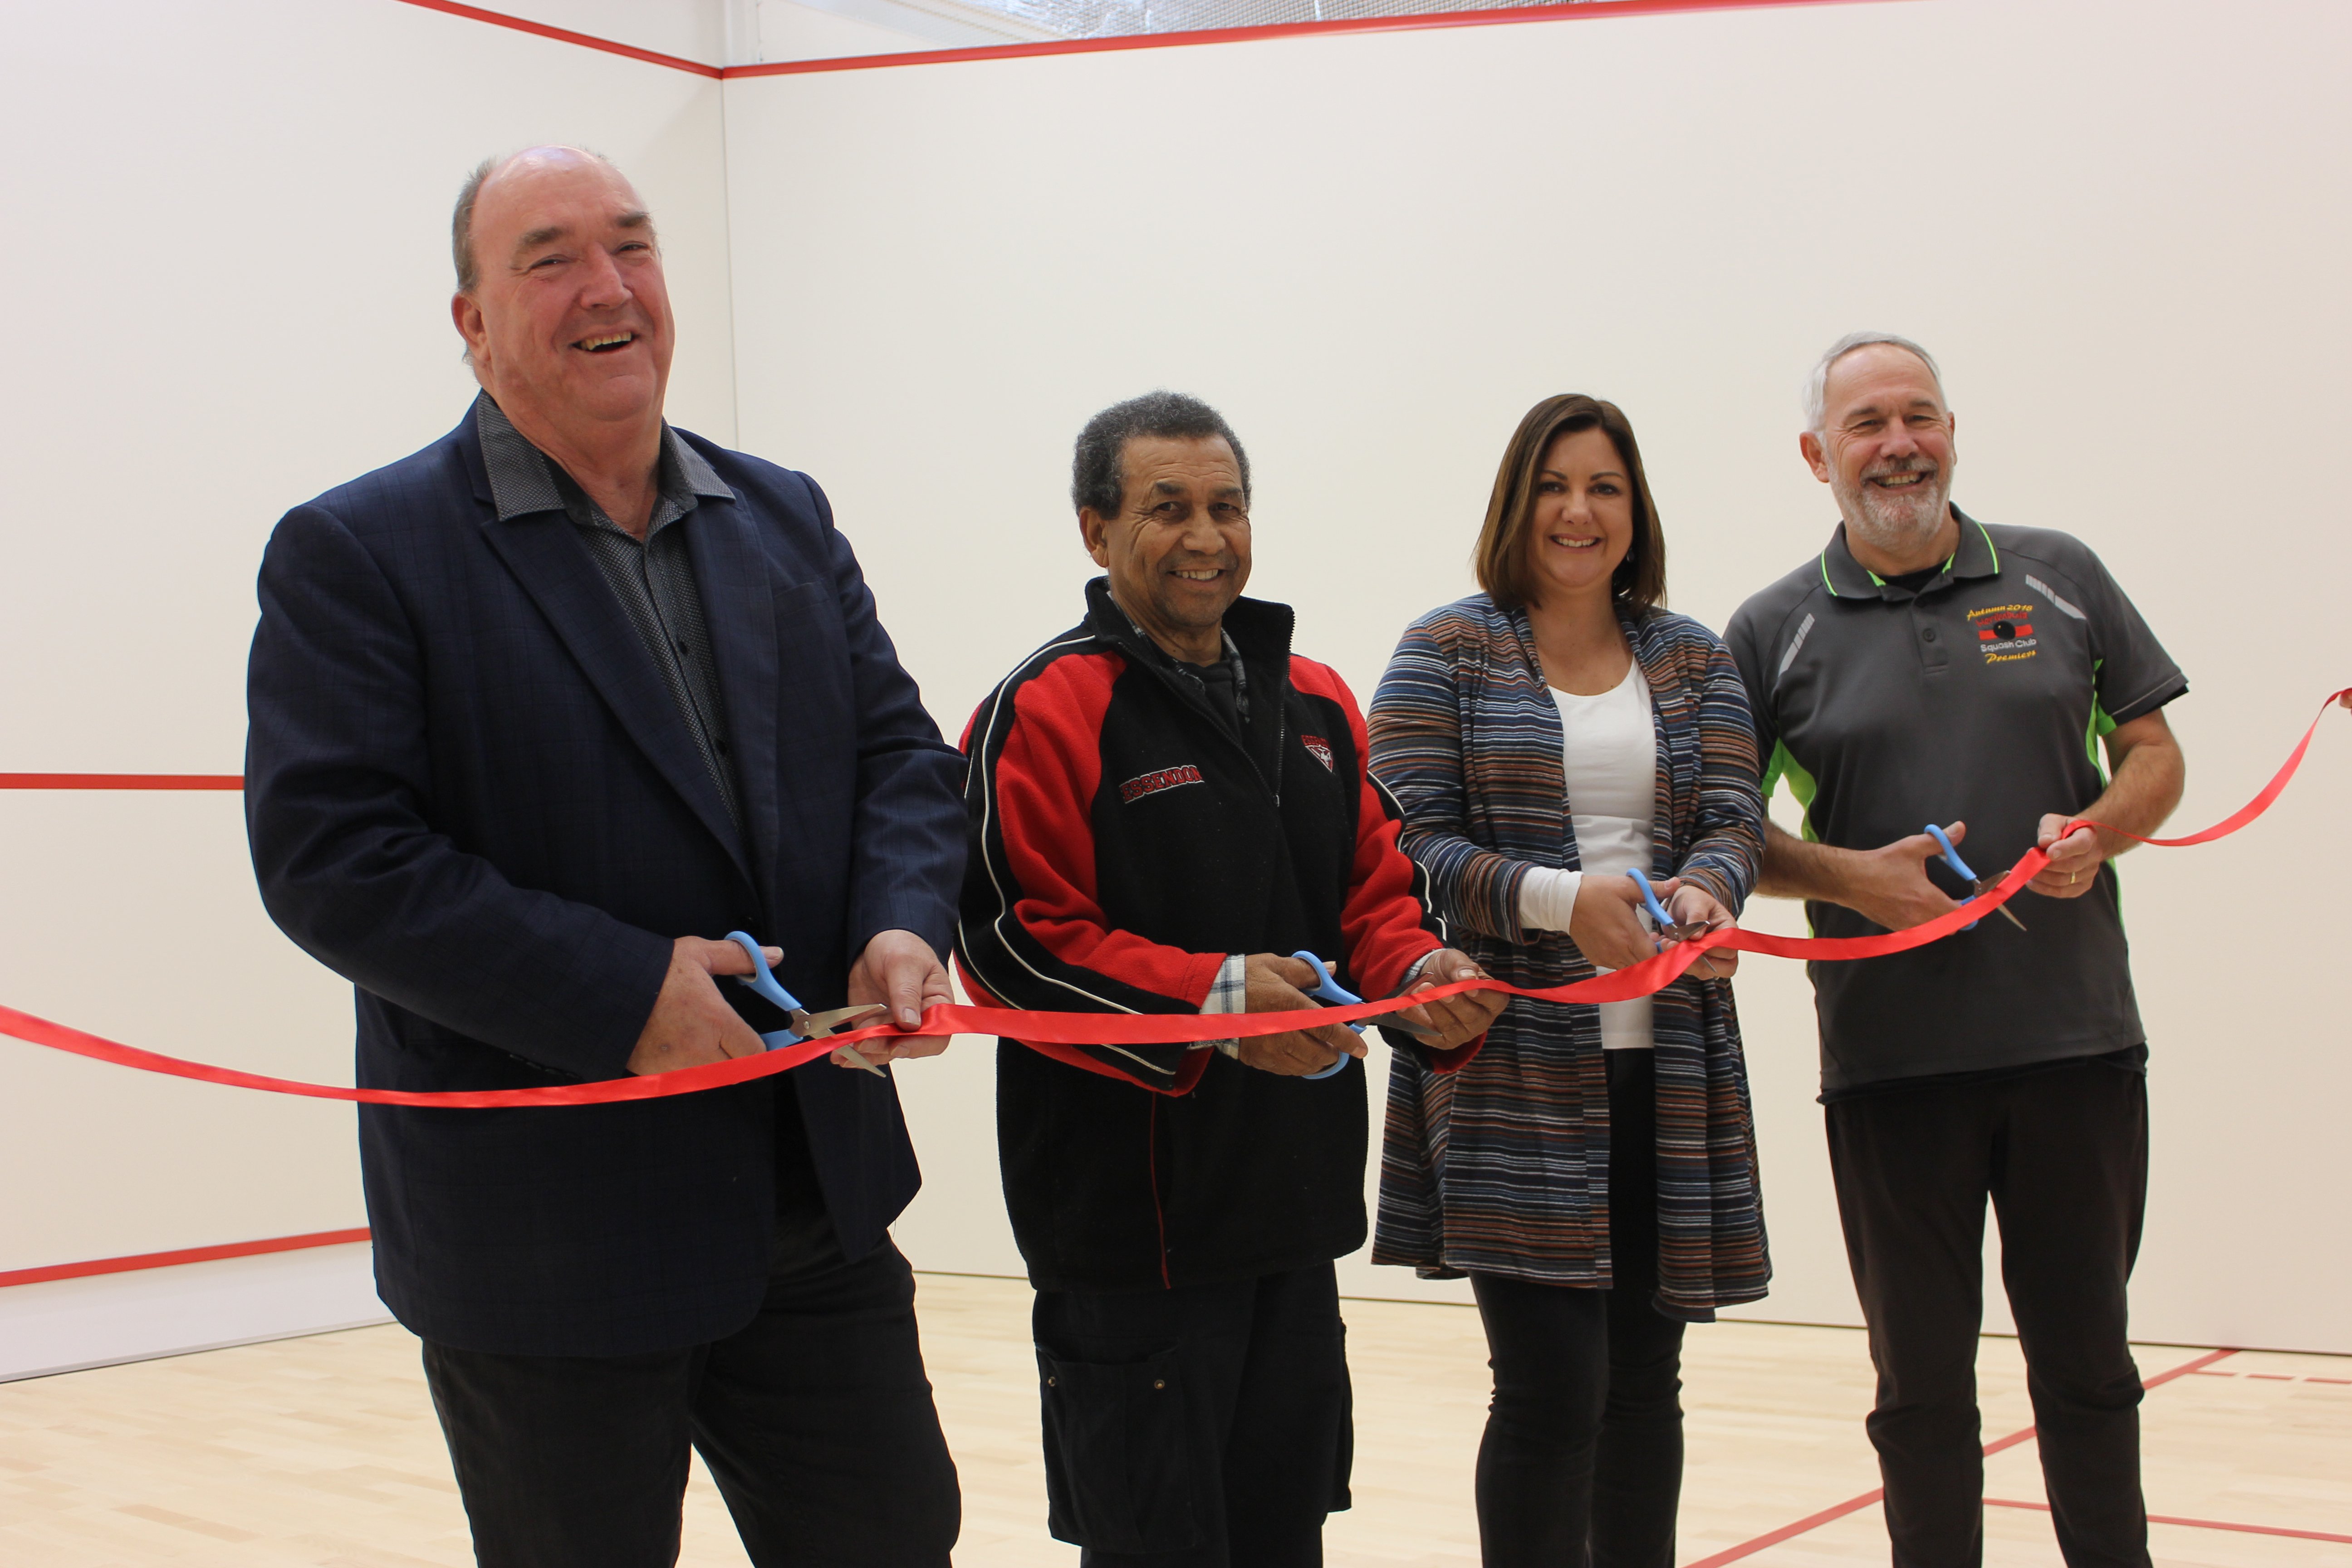 New multi-use squash courts in Pambula provide space for many activities